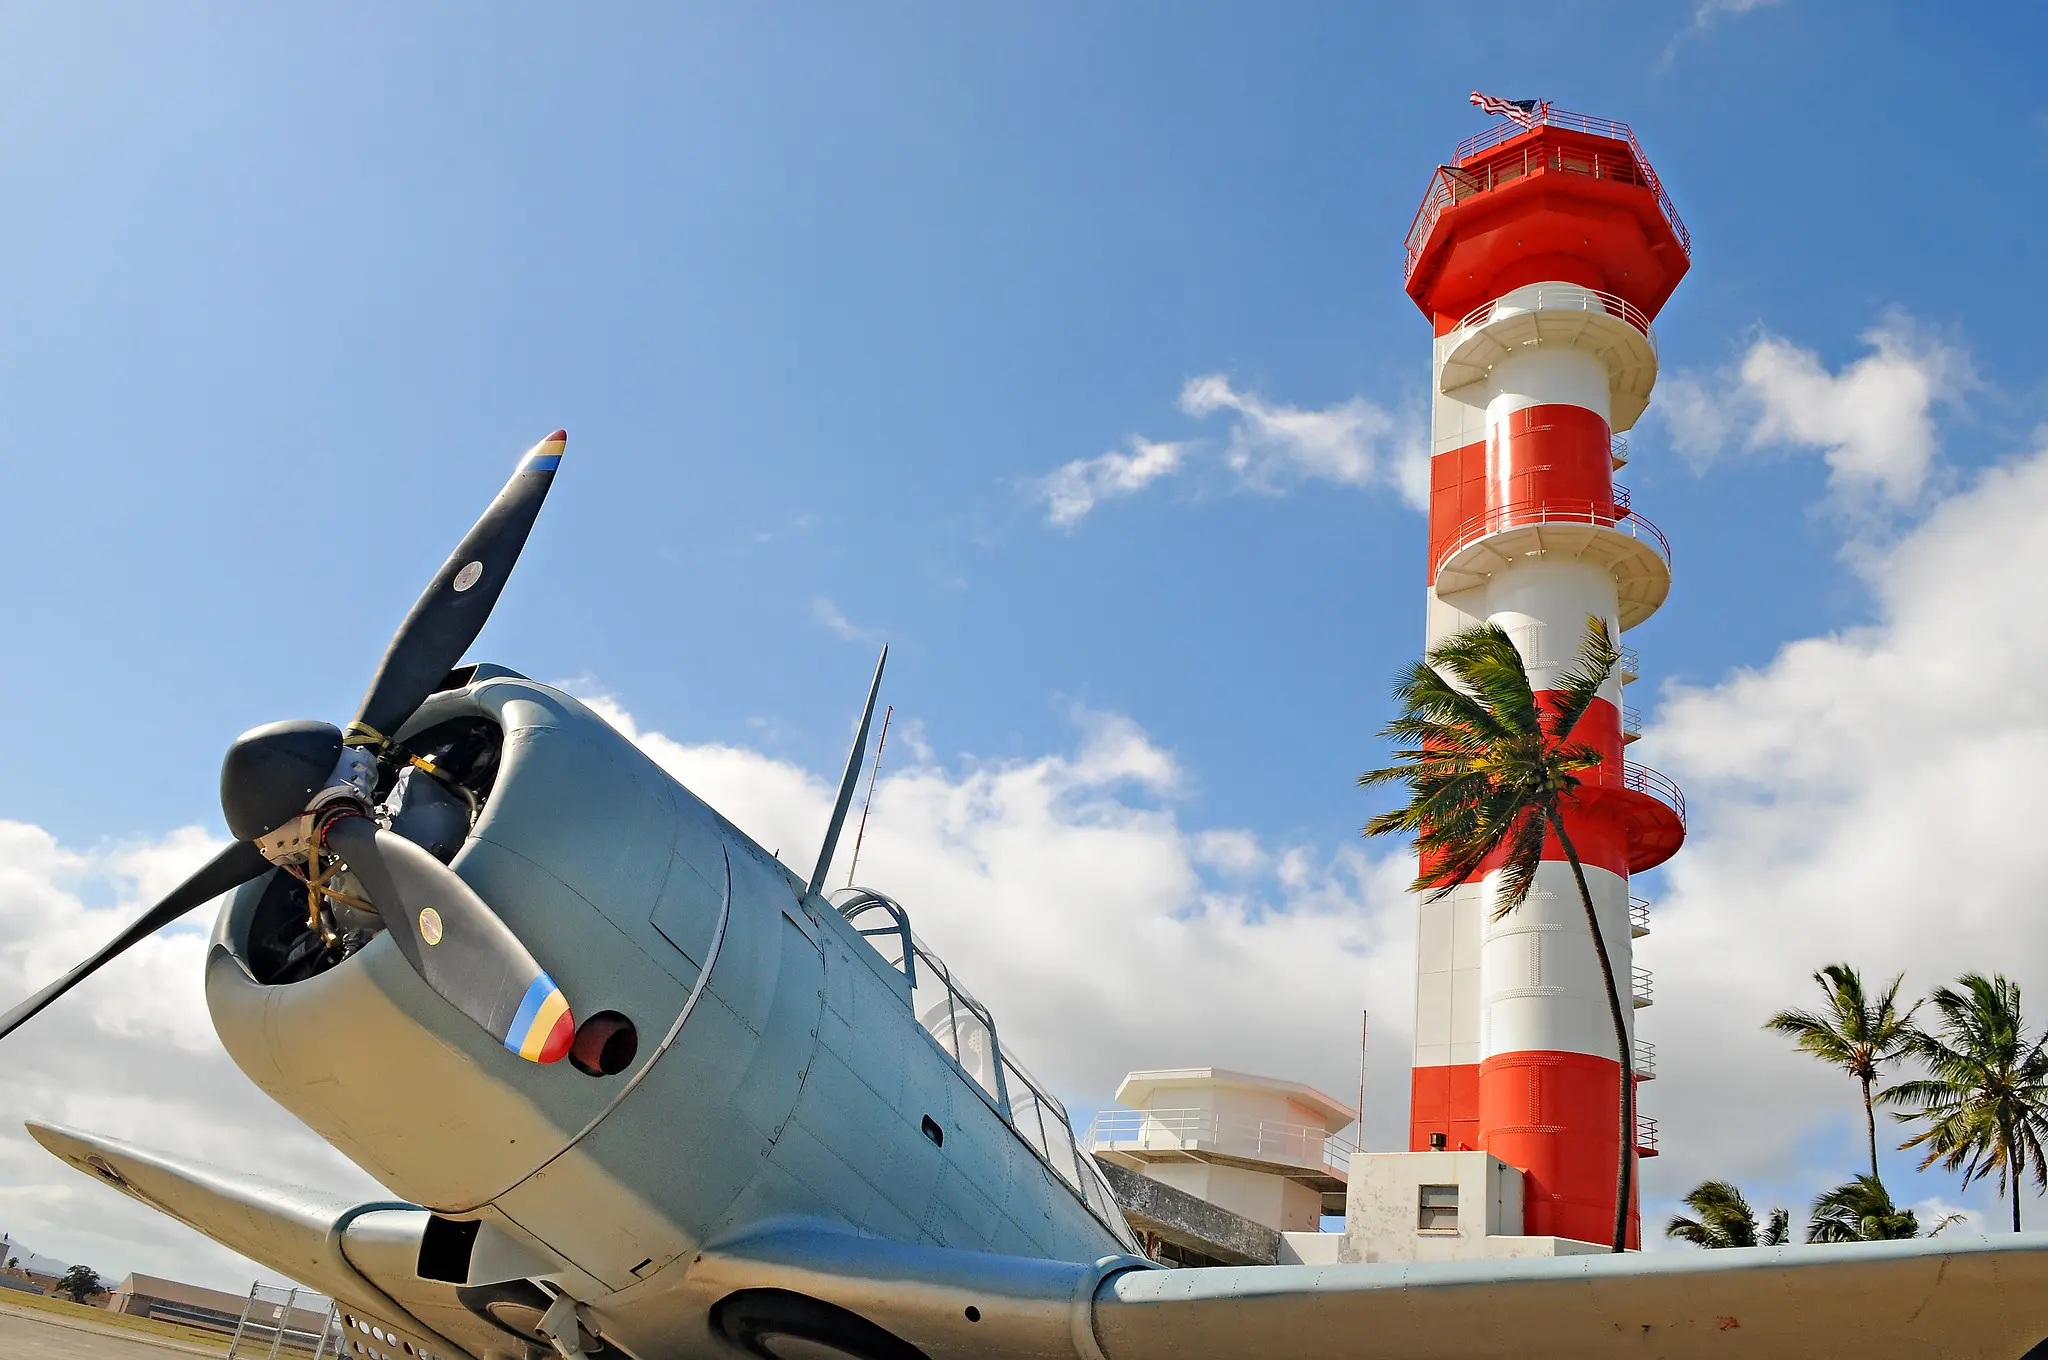 Photograph of the front of an aircraft in the foreground and the Ford Island Control Tower standing proudly in the background. Taken after recent rennovation.